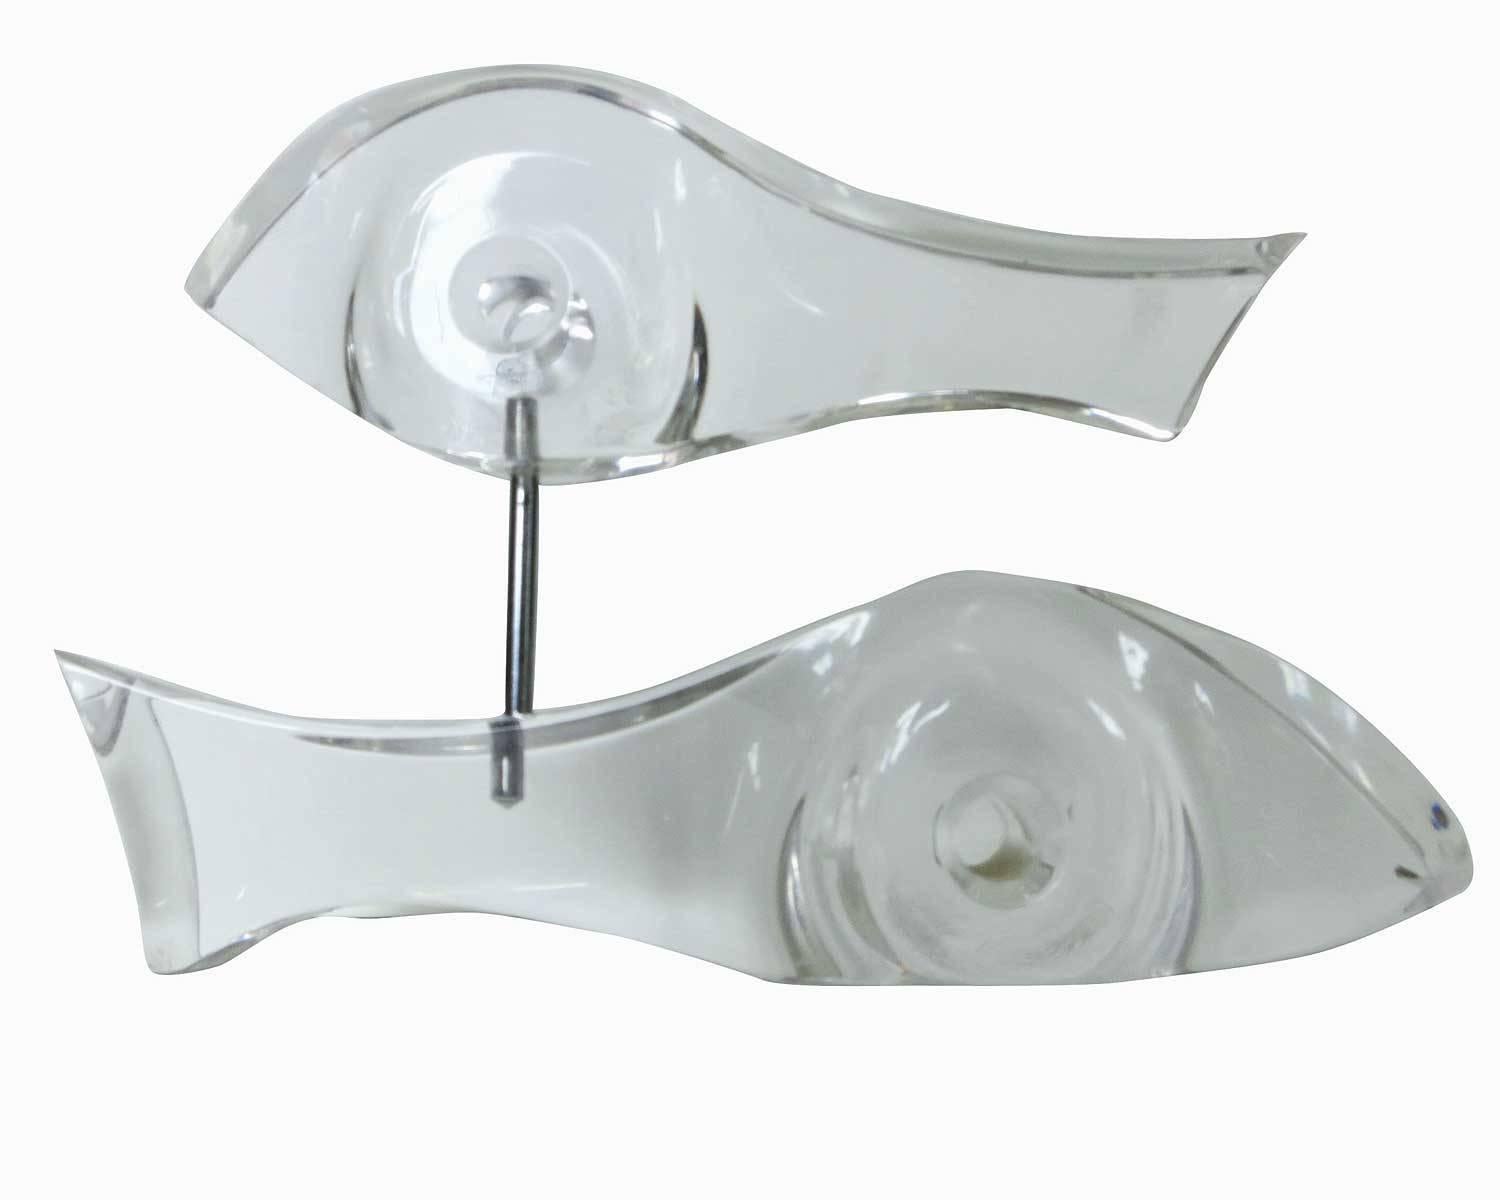 Abstract Lucite sculpture featuring two fish swing in the shape of a yinyang, circa 1960. There is one large 10” long sculpture serving as the base with second smaller 8.25